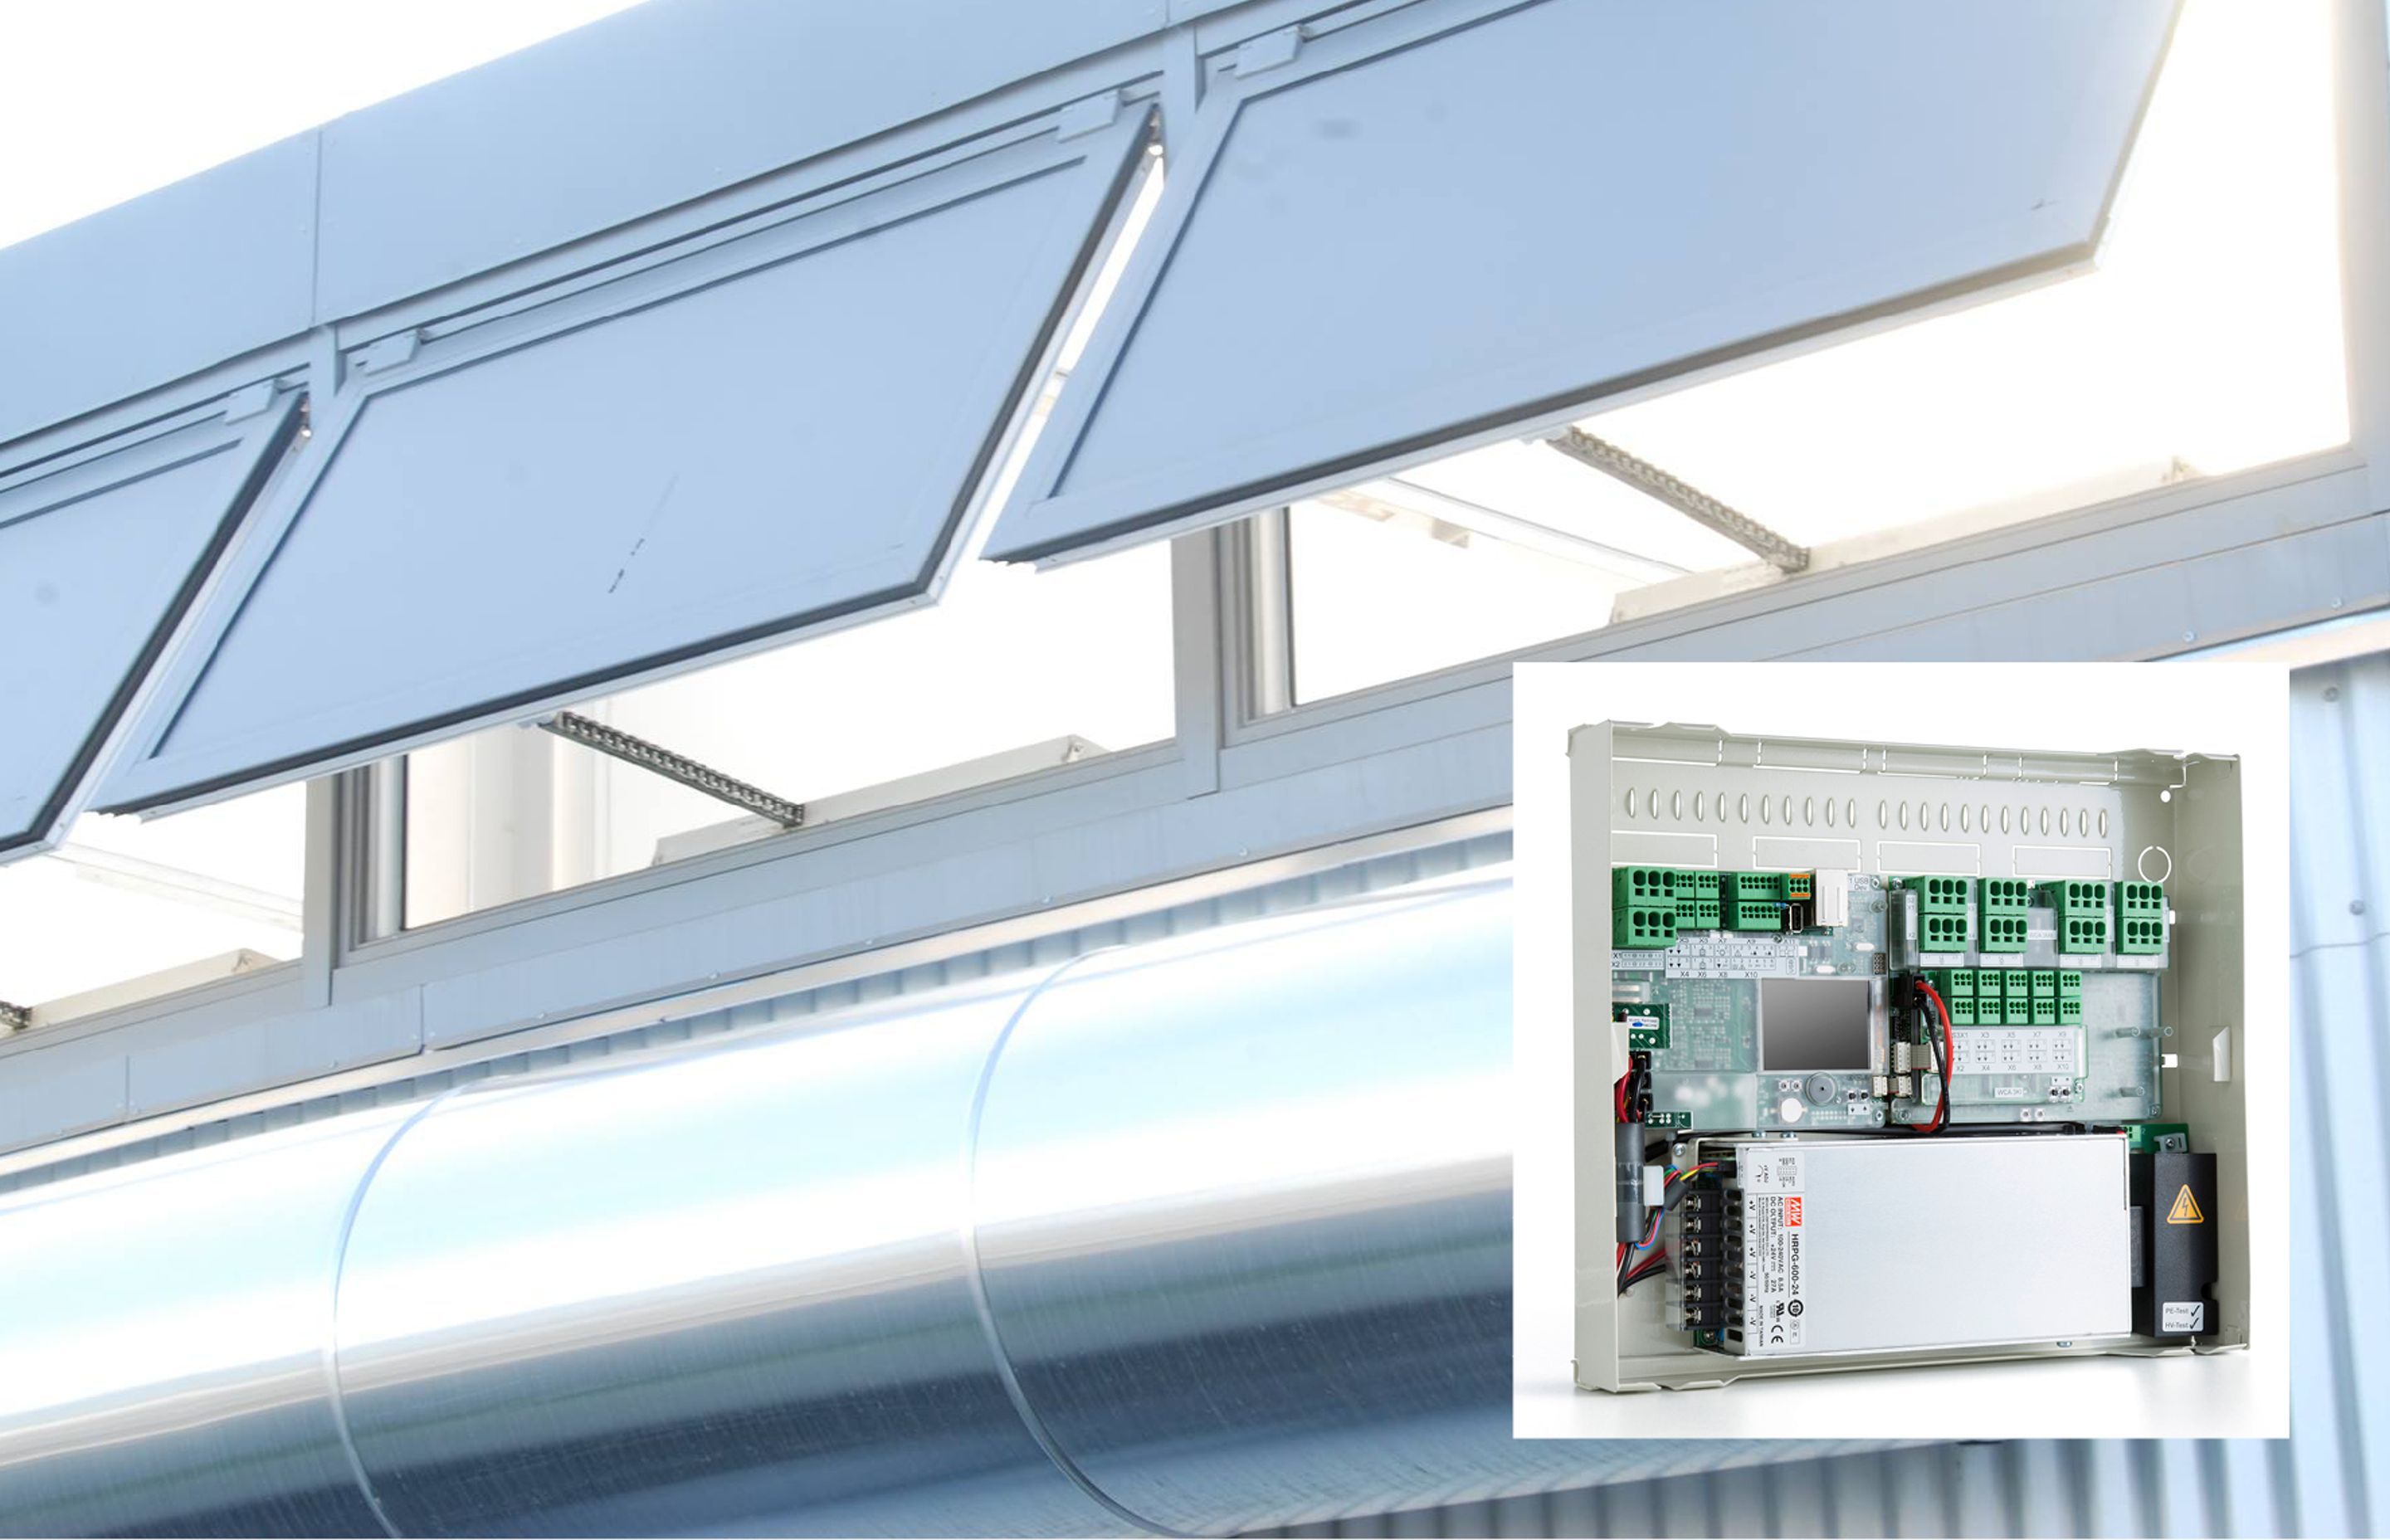 Wireless control of the ventilation system is achieved with a connected controller, which can be configured to "talk" to individual activators or to entire zones. 